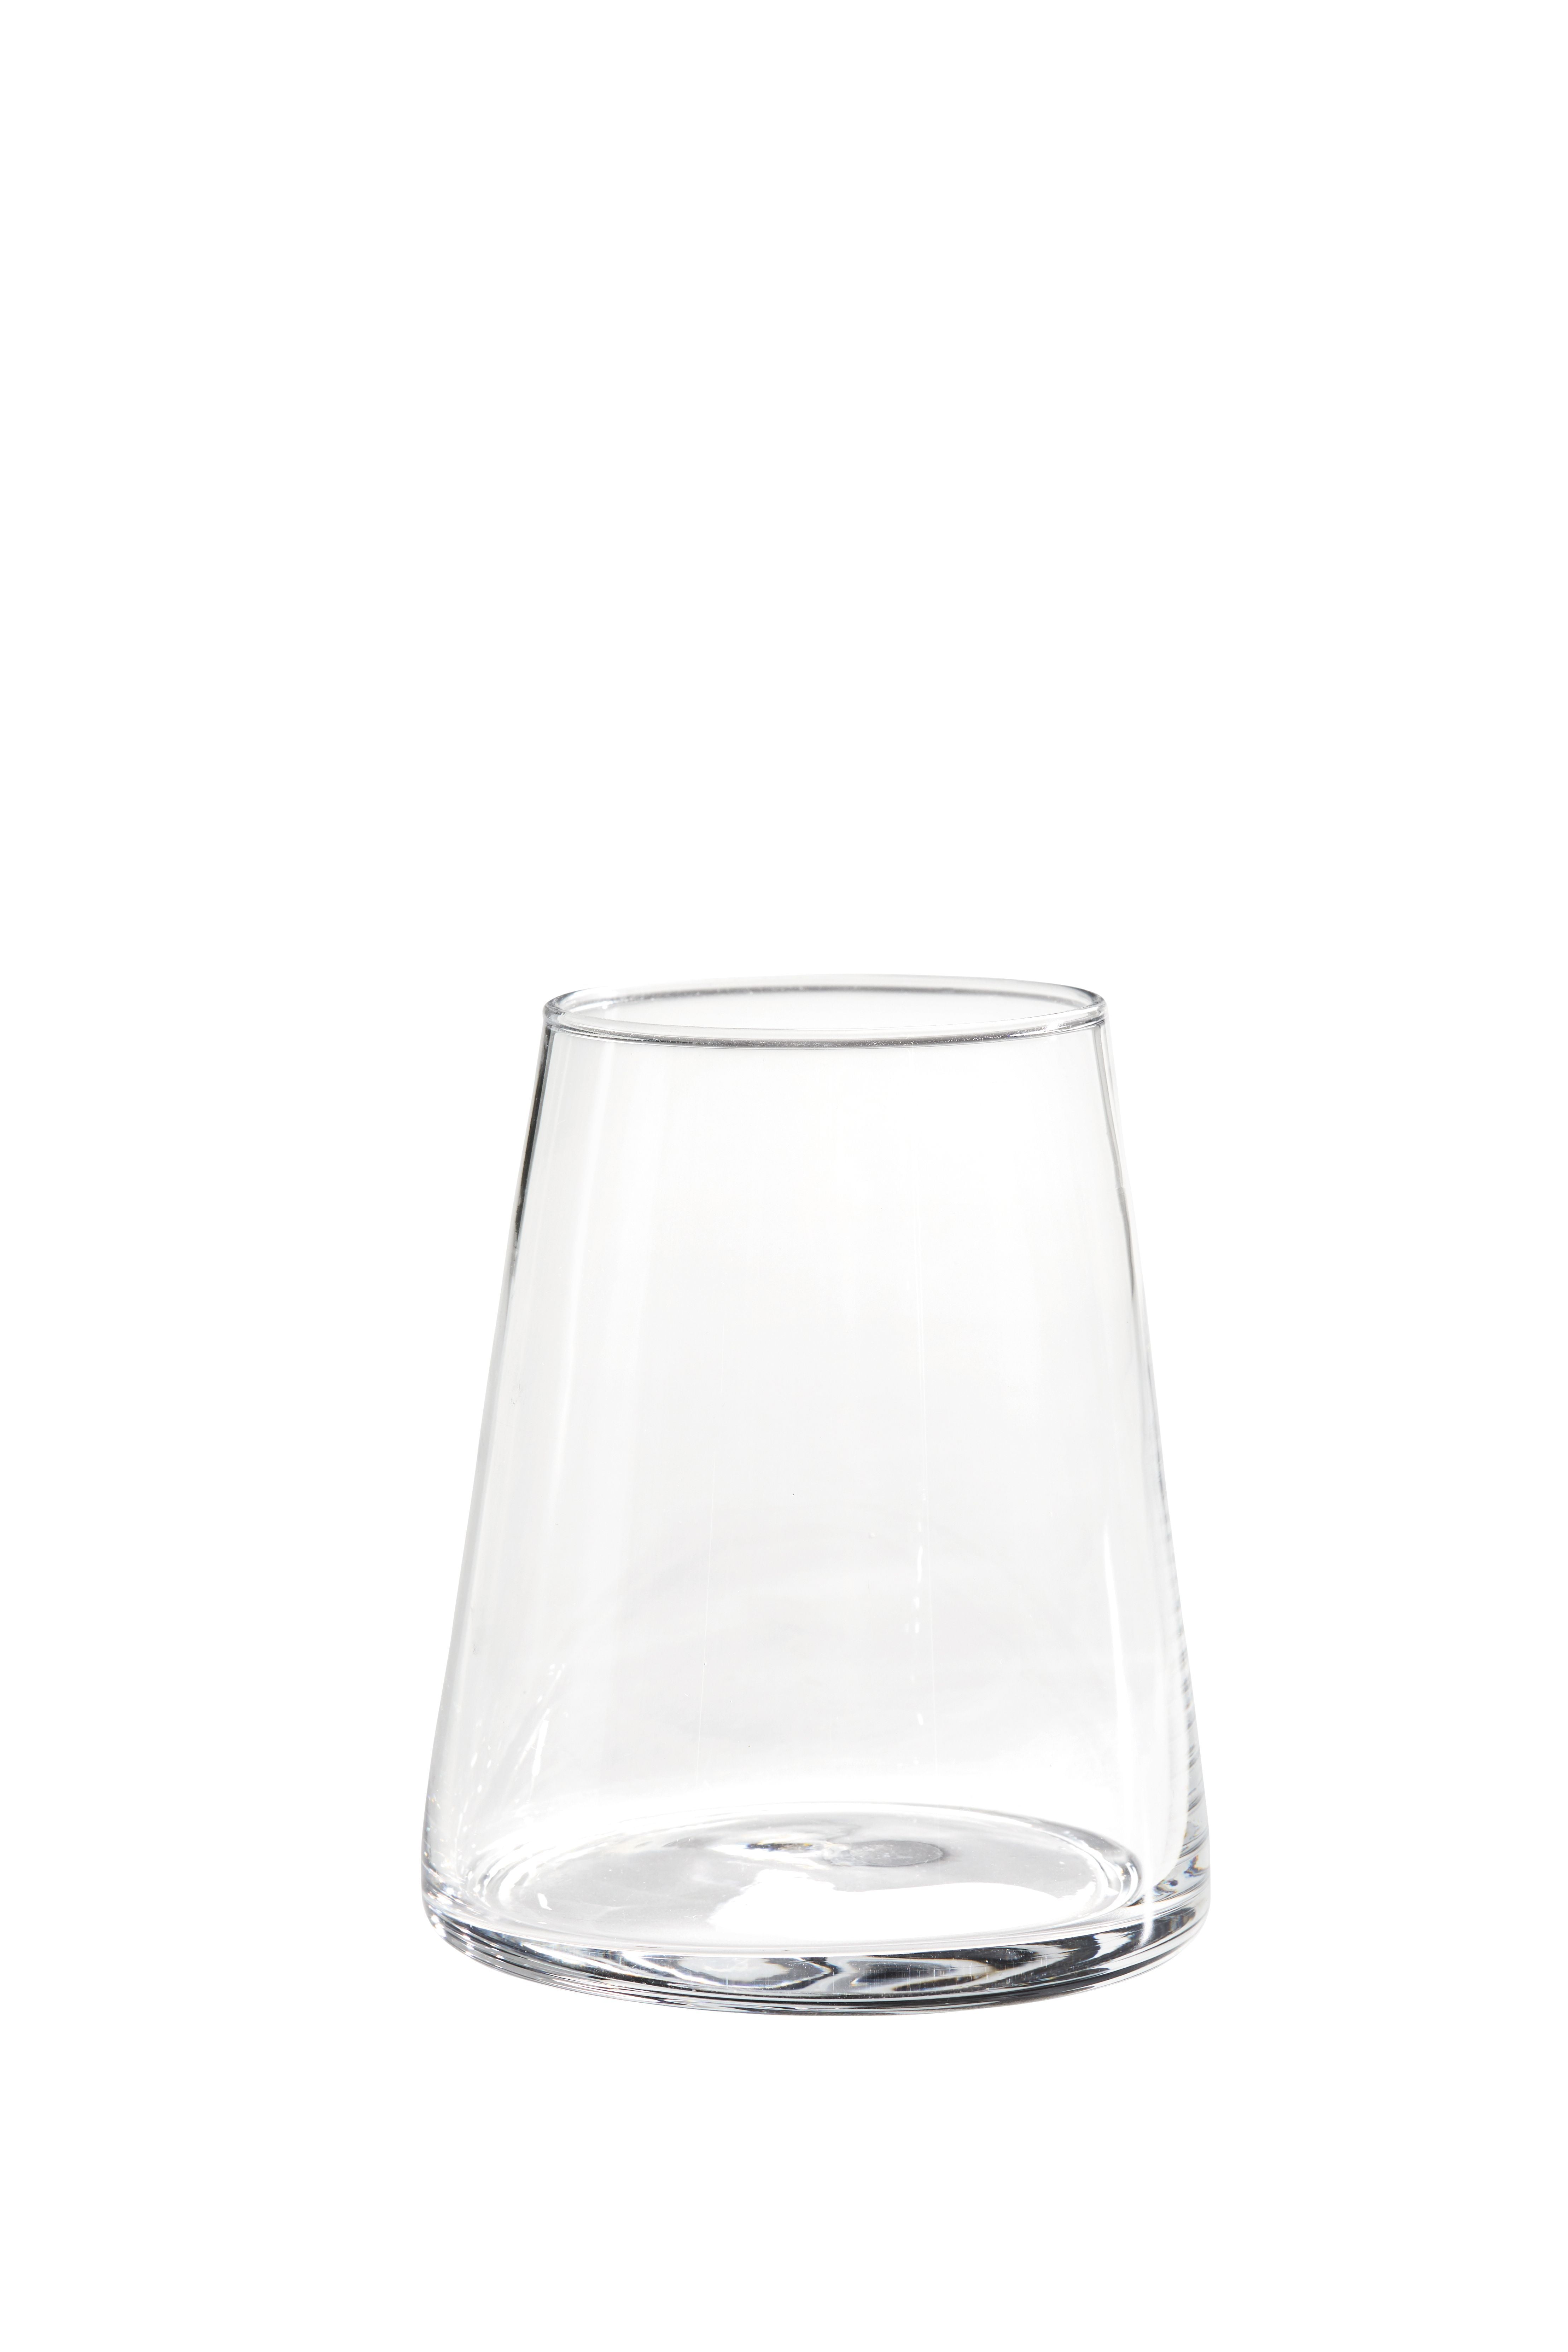 Better Homes & Gardens Clear Flared Stemless Wine Glass, 4 Pack